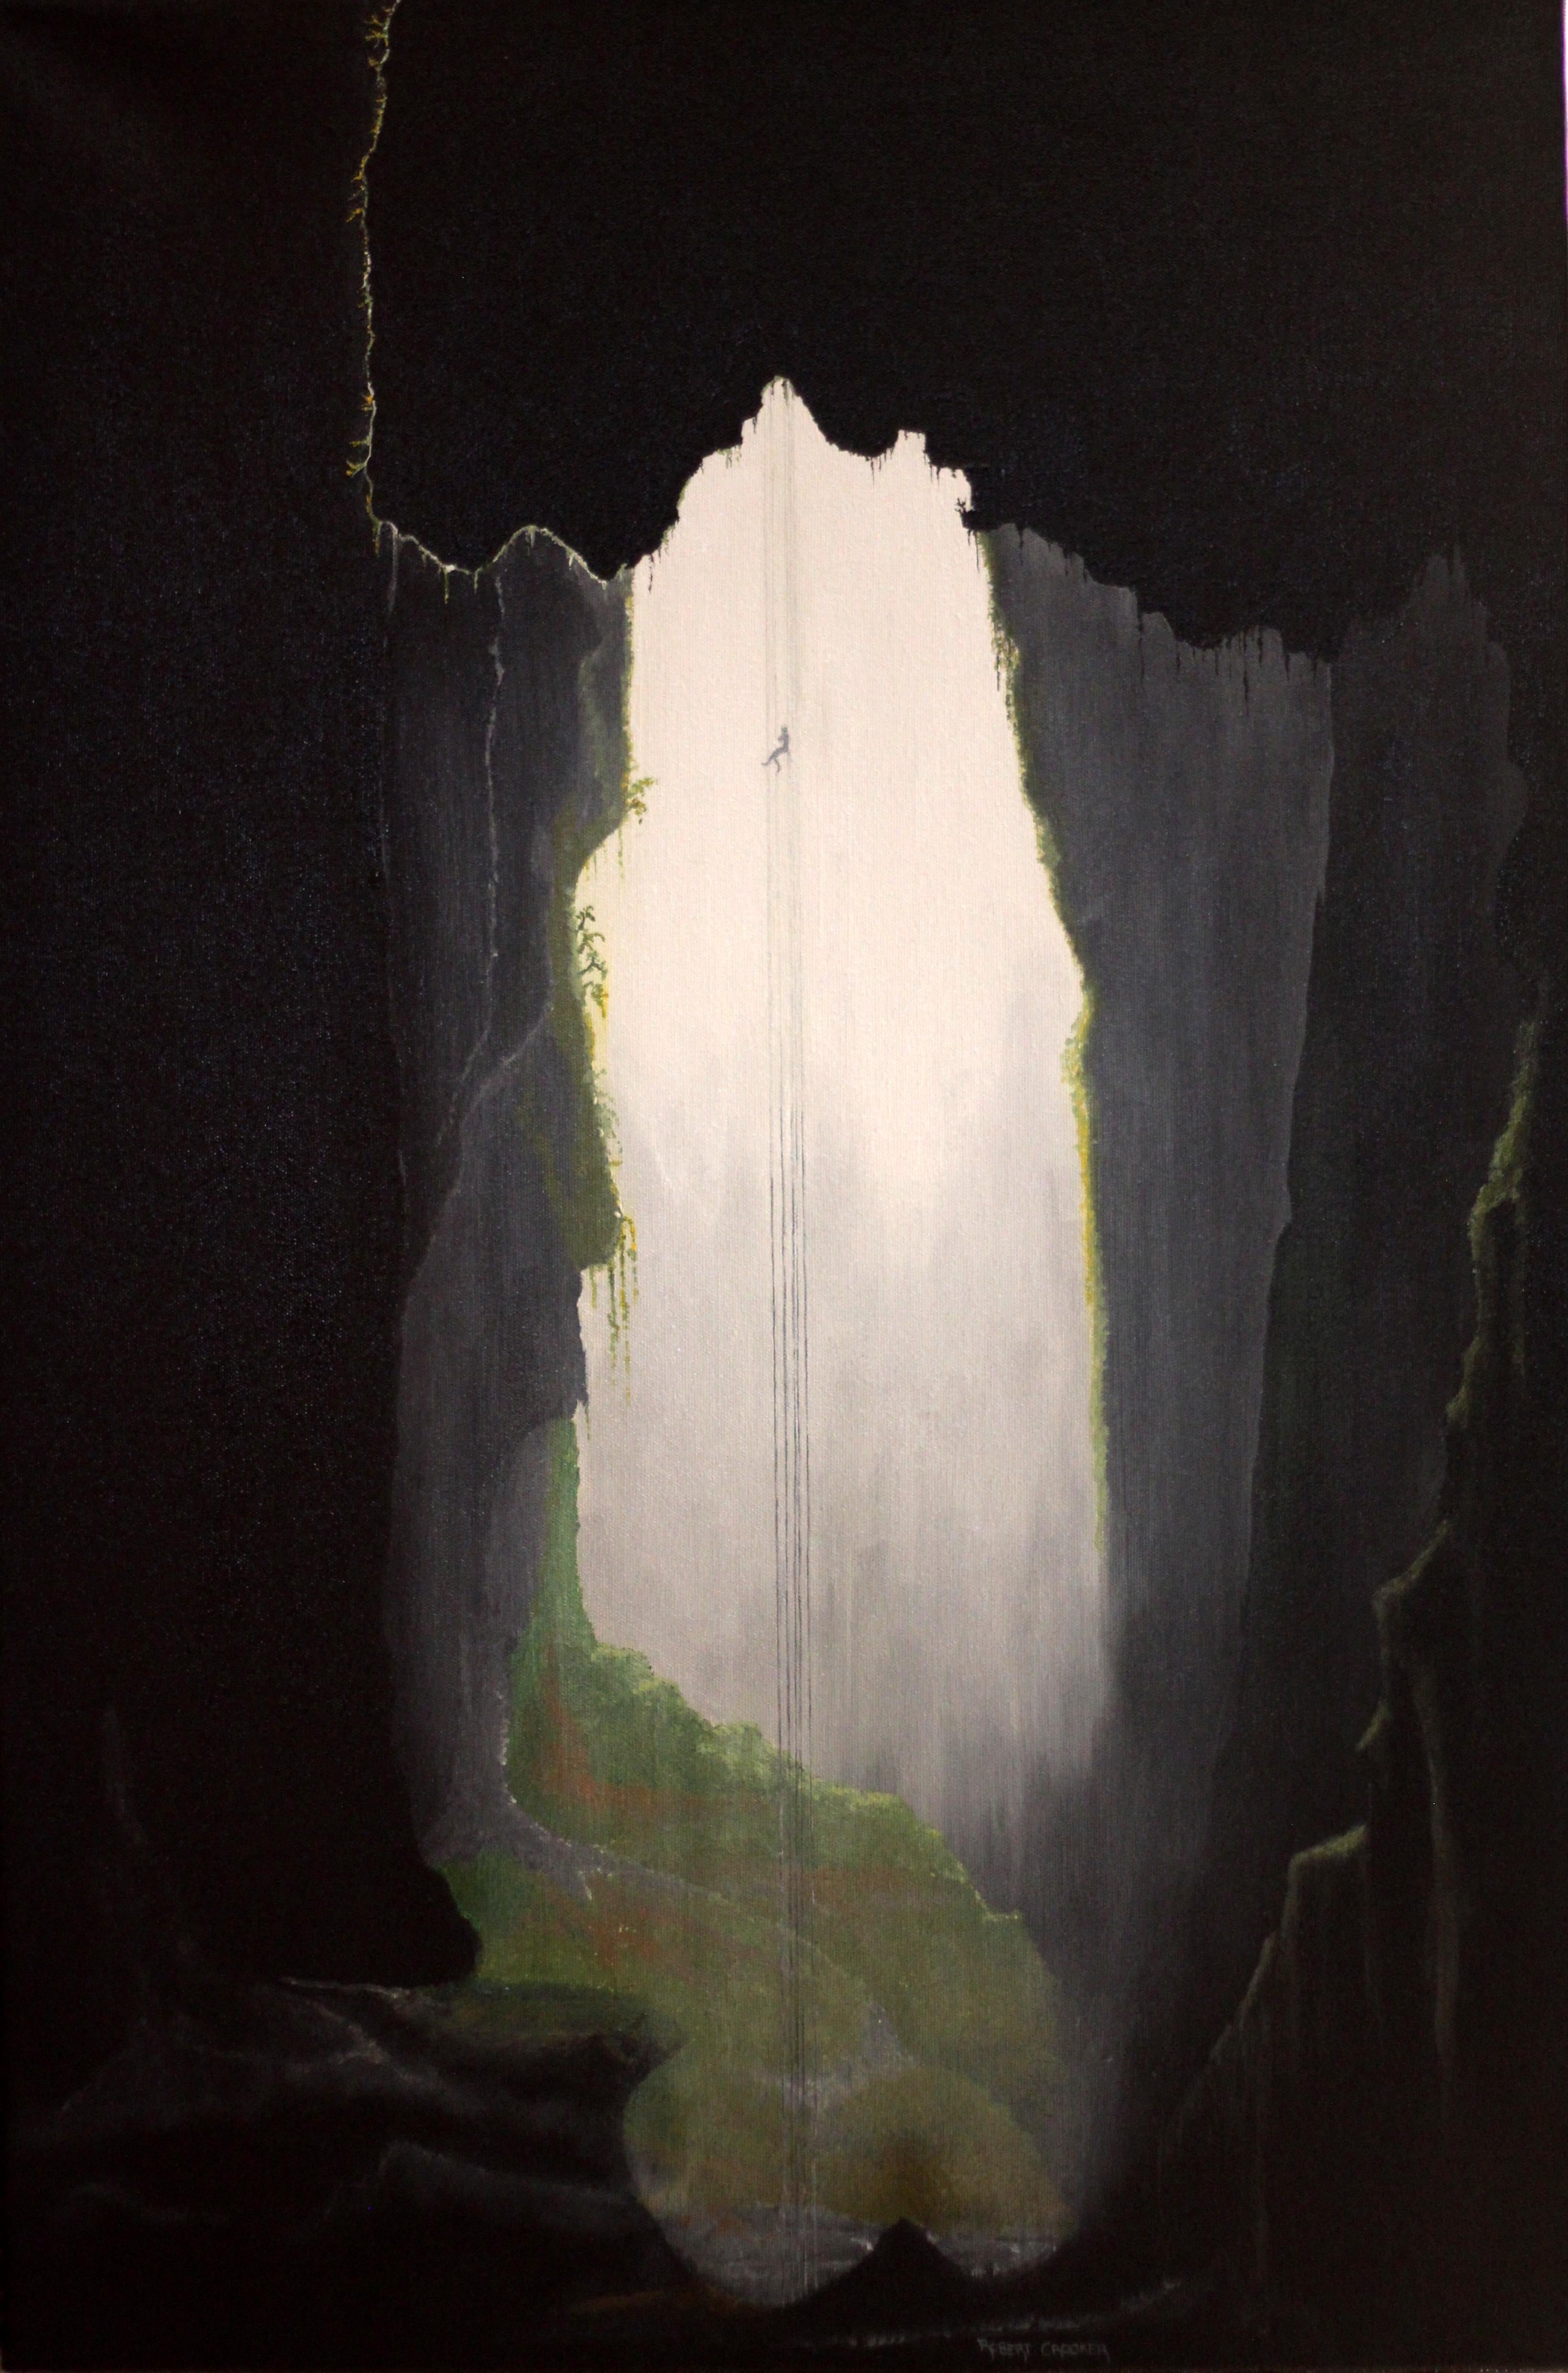 Descend, Original Signed Contemporary Landscape Painting
30" x 20" x 2" (HxWxD) Acrylic on Canvas
Hand-signed by the artist.

Artist Robert Crooker captures the sublime in this almost otherworldly painting of a cavernous sinkhole. A small figure can